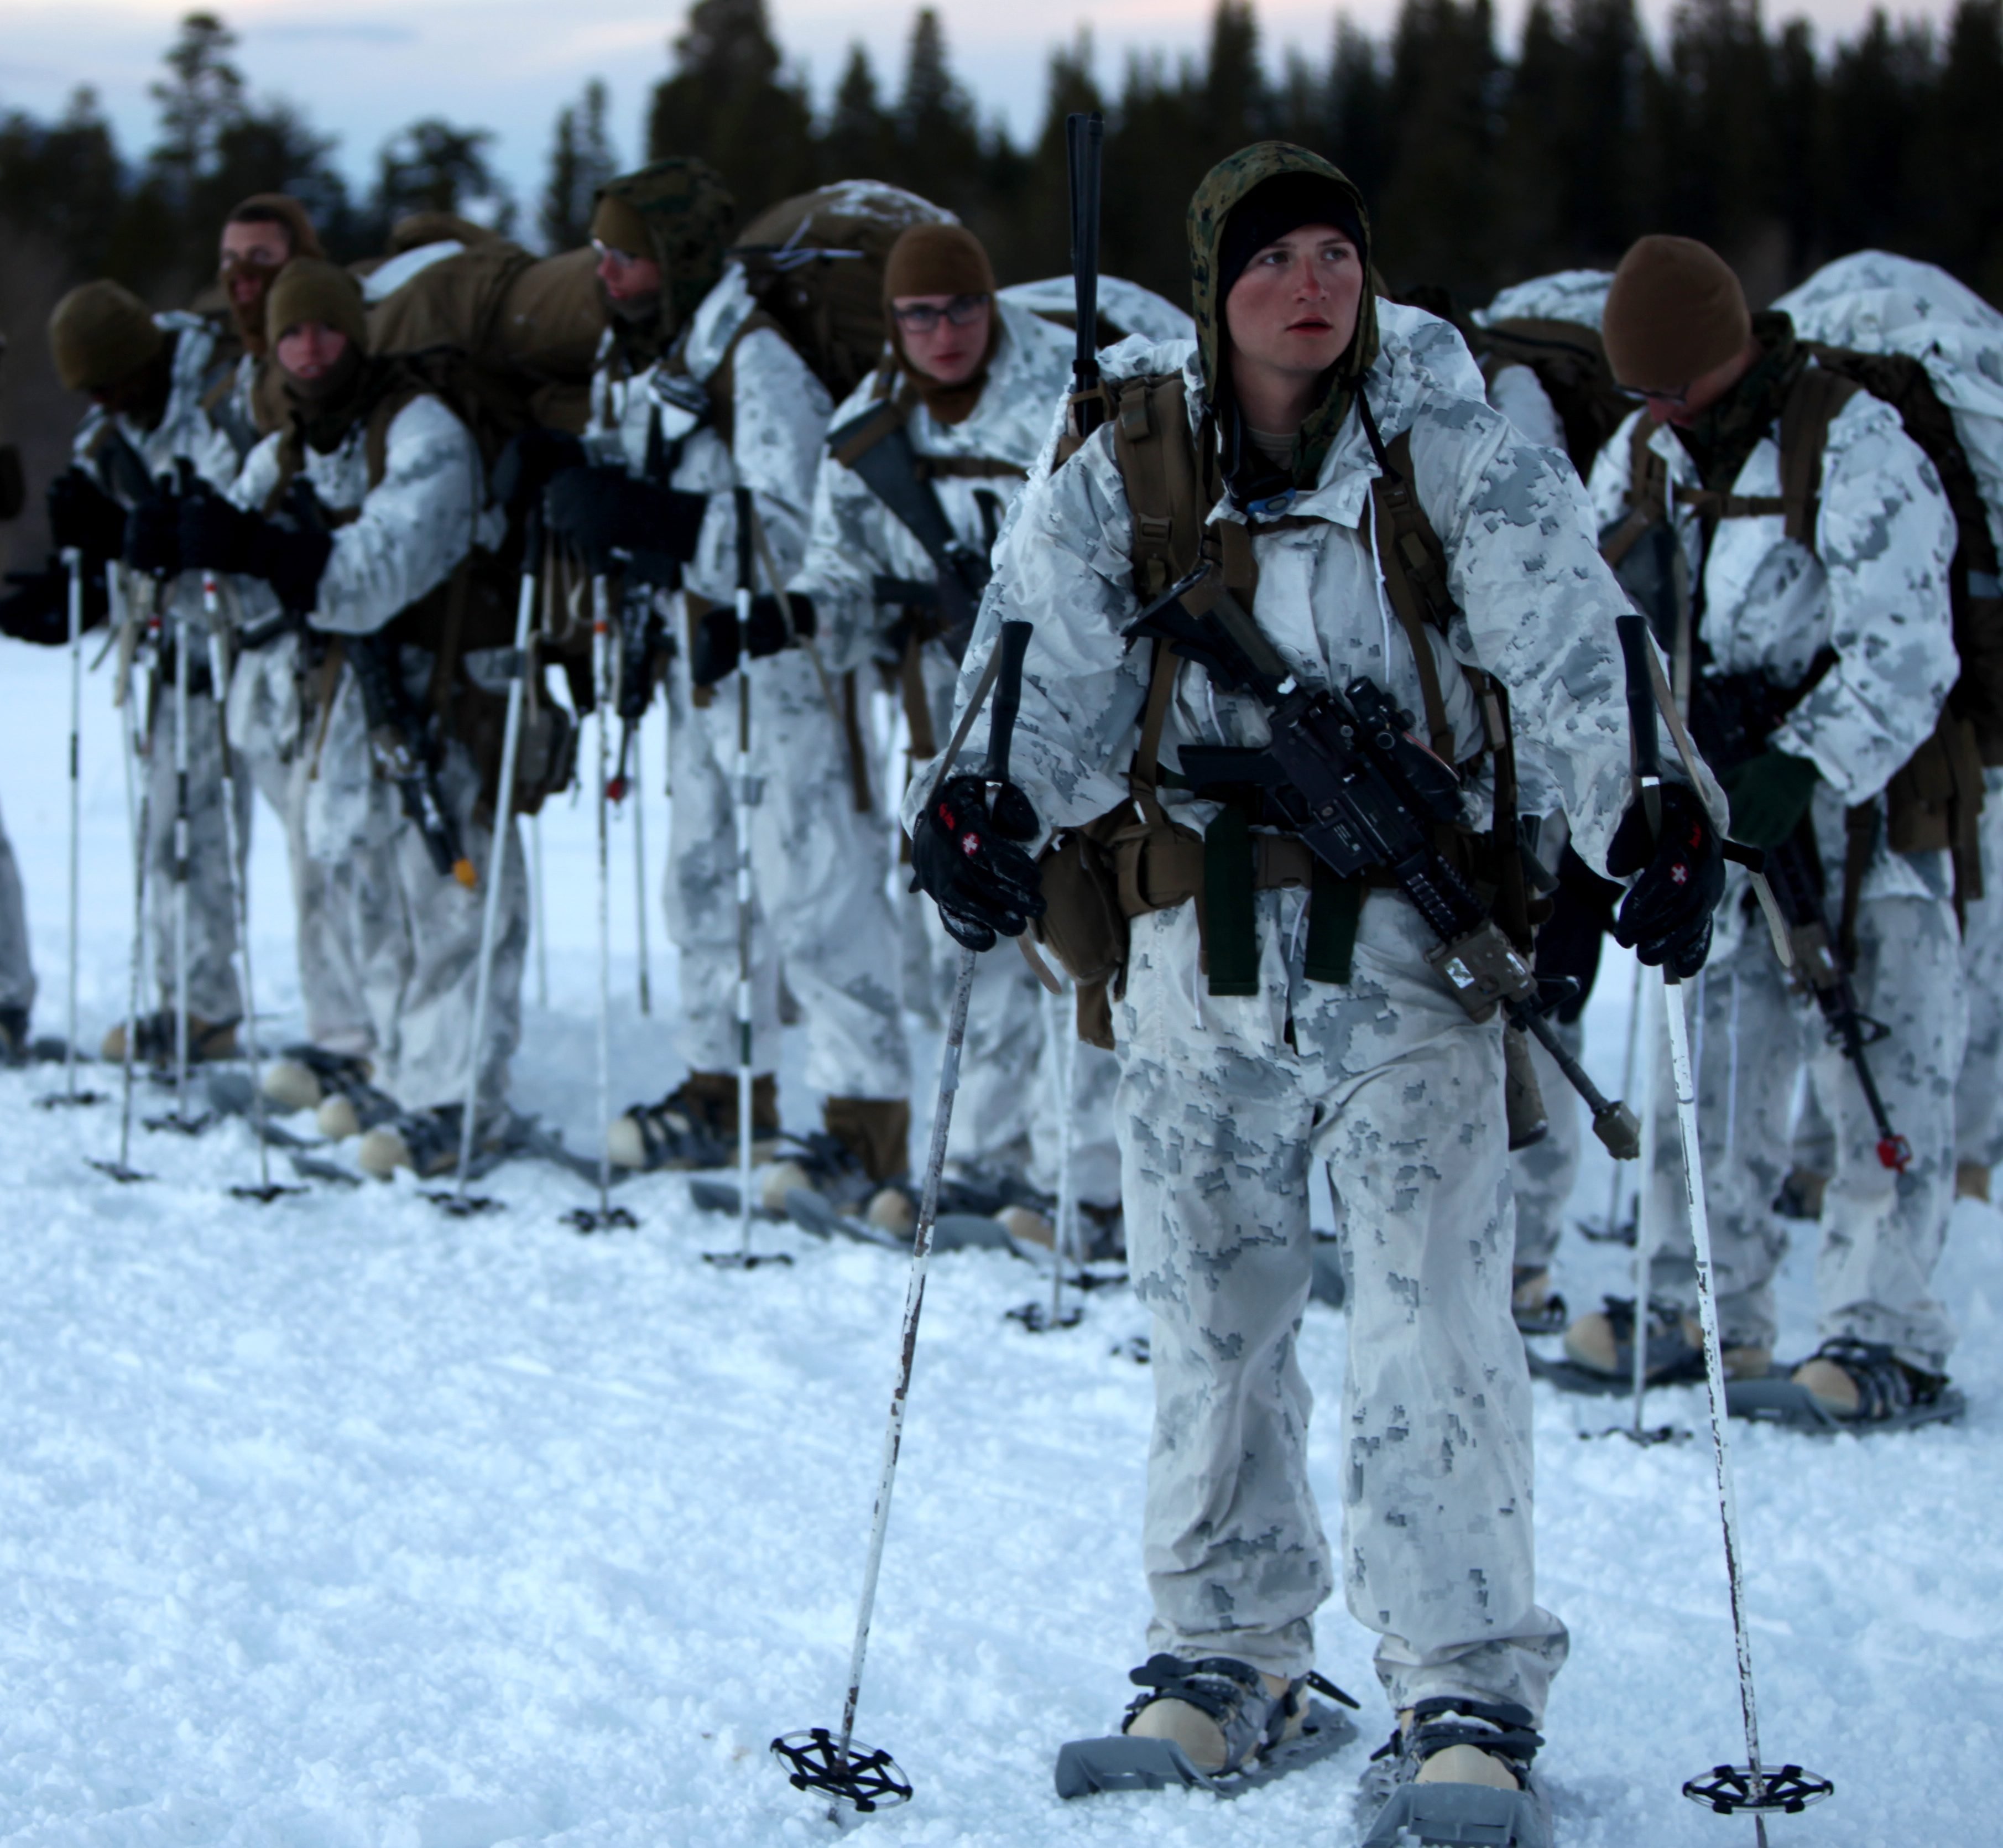 Marines check their gear before continuing a hike up in the Sierra Mountains during cold weather training at Marine Corps Mountain Warfare Training Center, Calif. on Jan. 21, 2016. US Marine Corps Photo